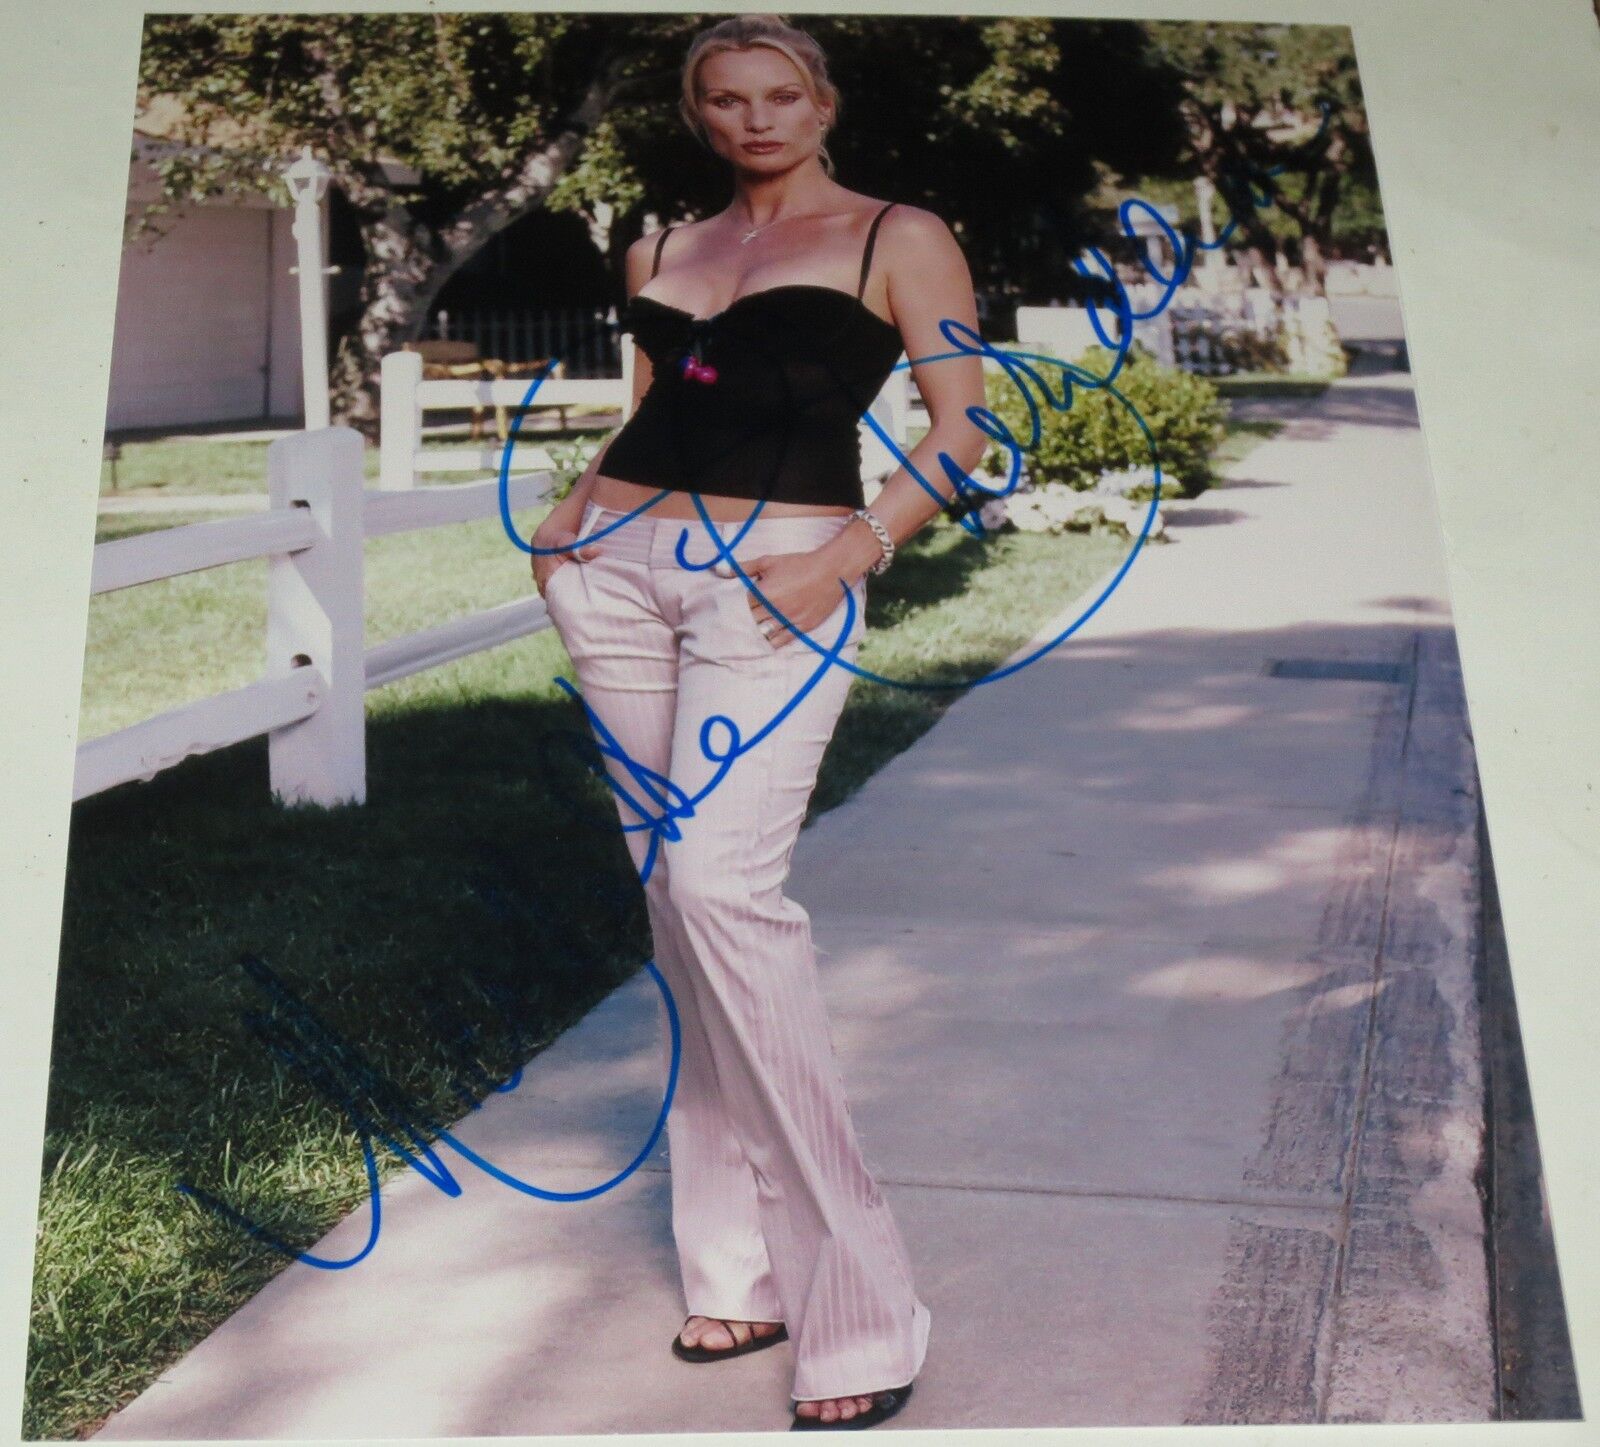 NICOLLETTE SHERIDAN SIGNED 8X10 PHOTO AUTHENTIC AUTOGRAPH DESPERATE HOUSEWIVES 